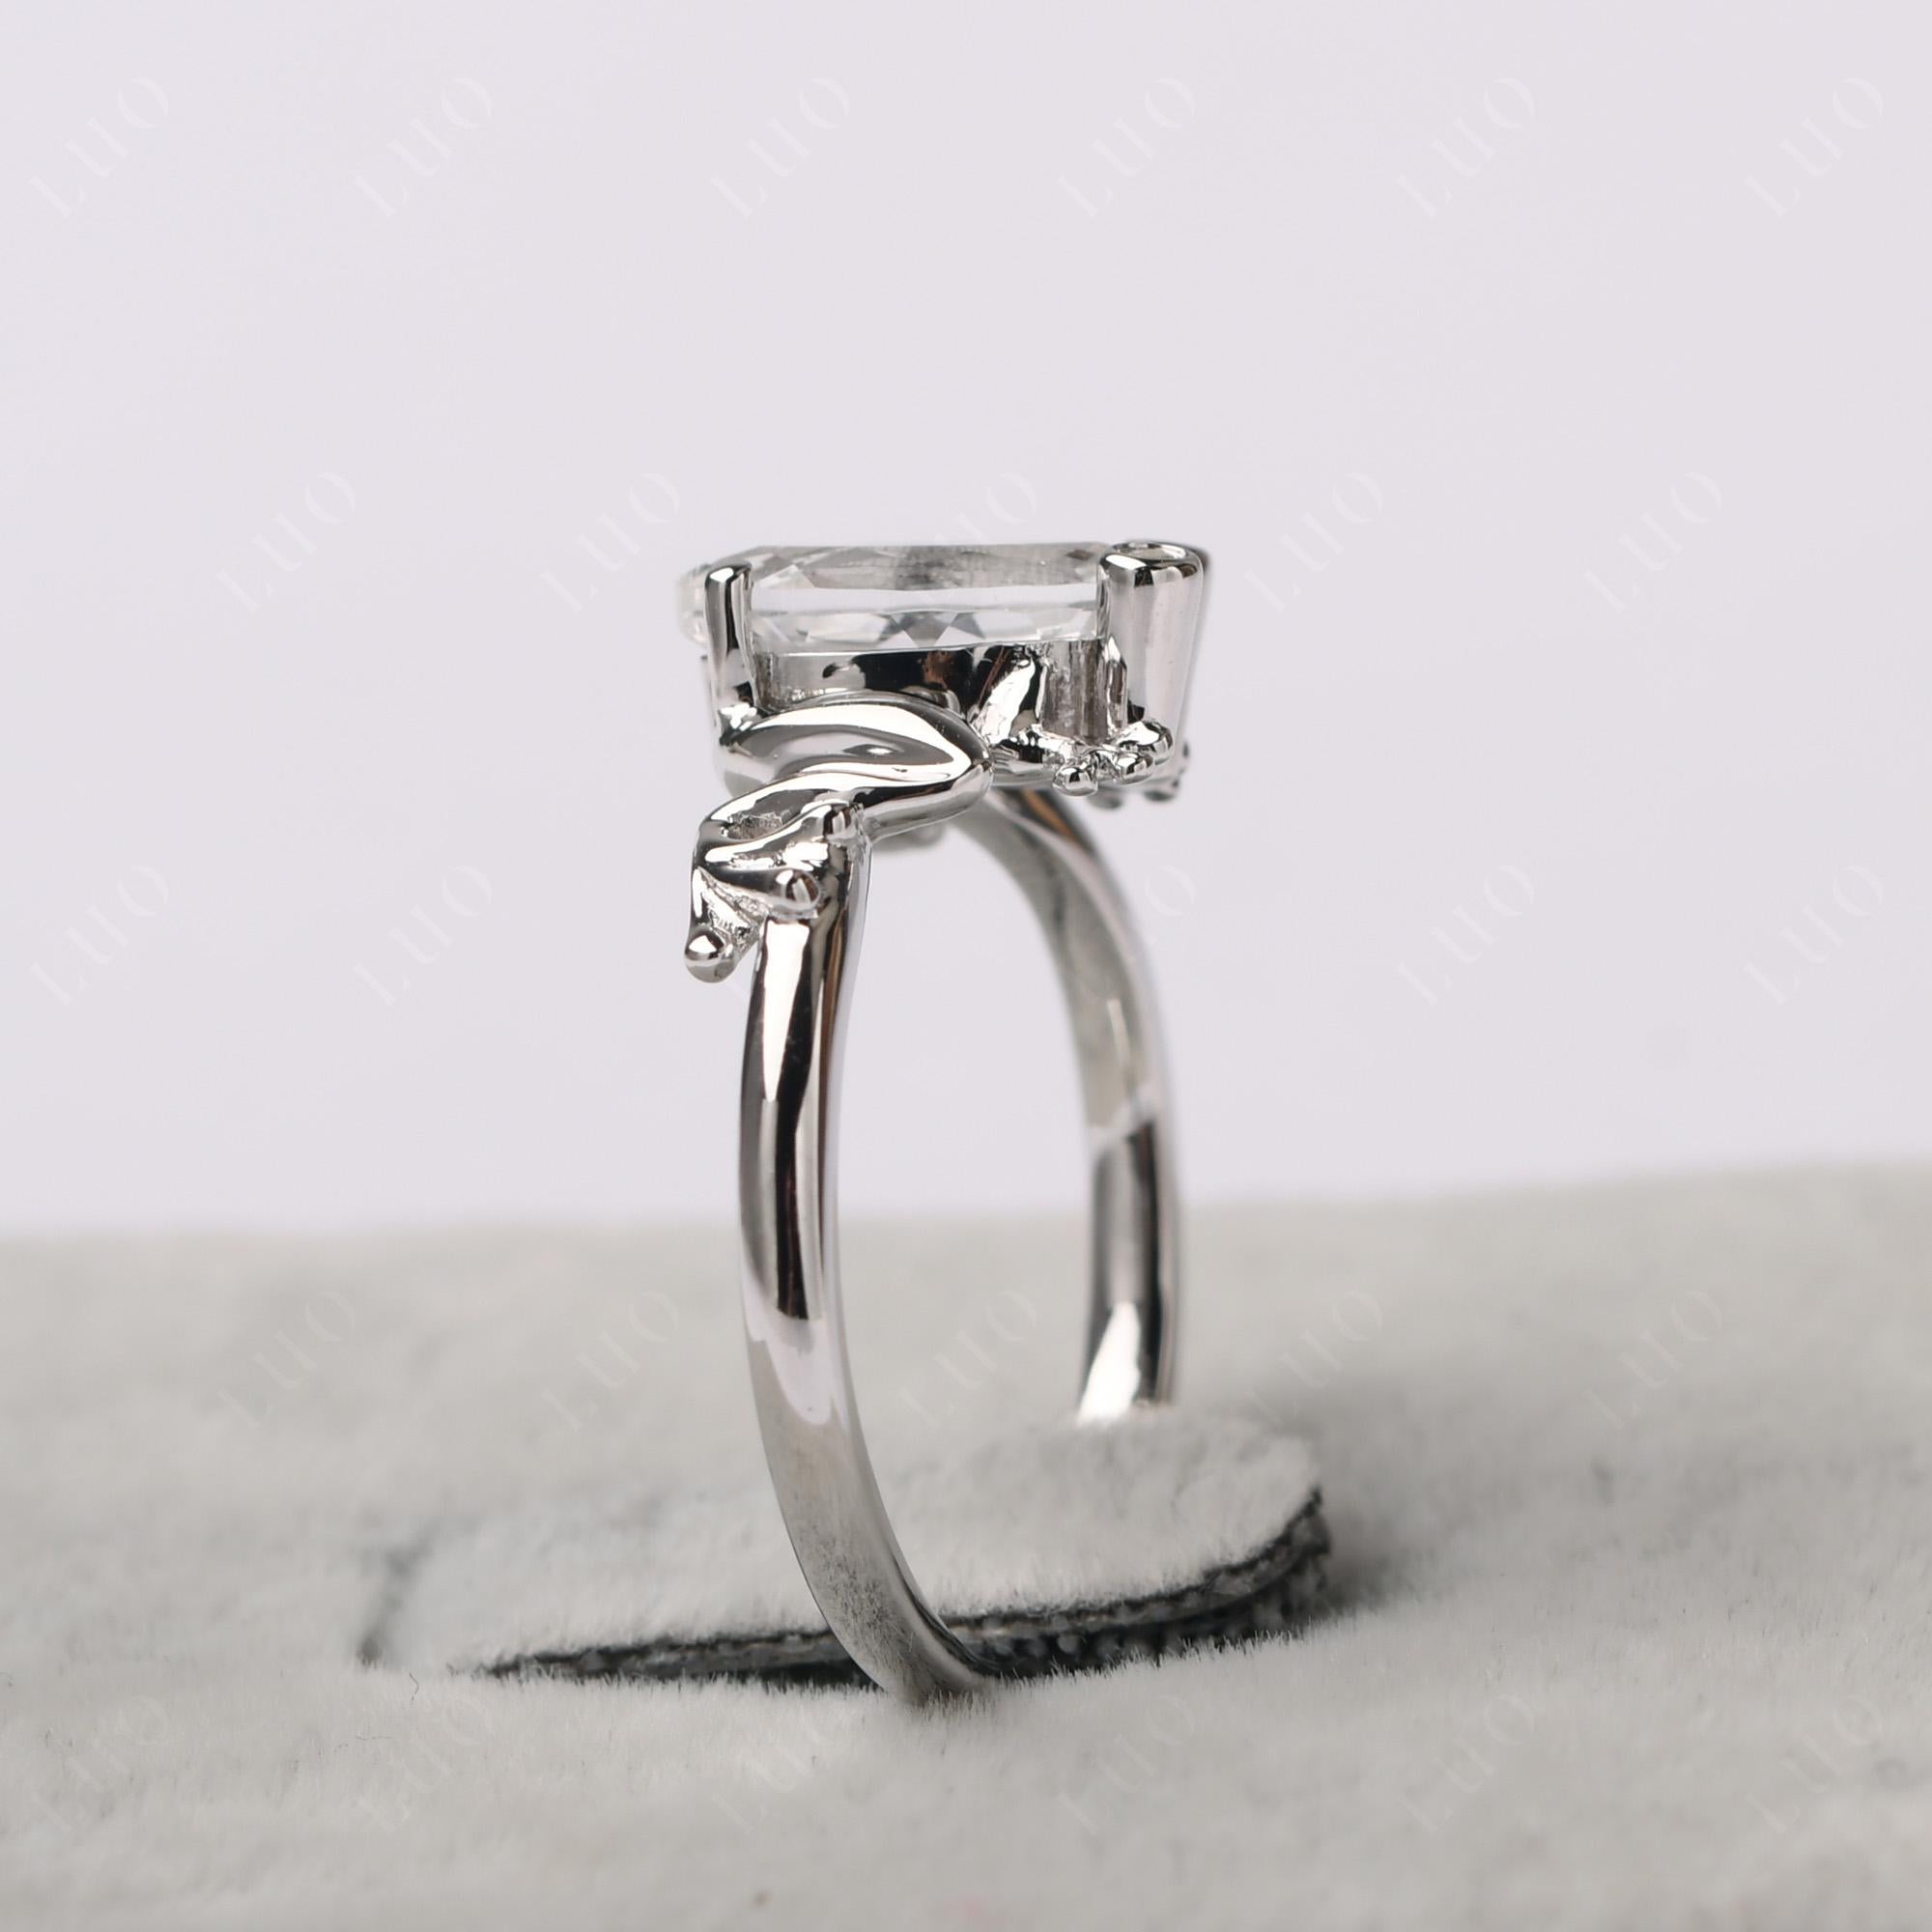 Marquise Cut White Topaz Frog Ring - LUO Jewelry